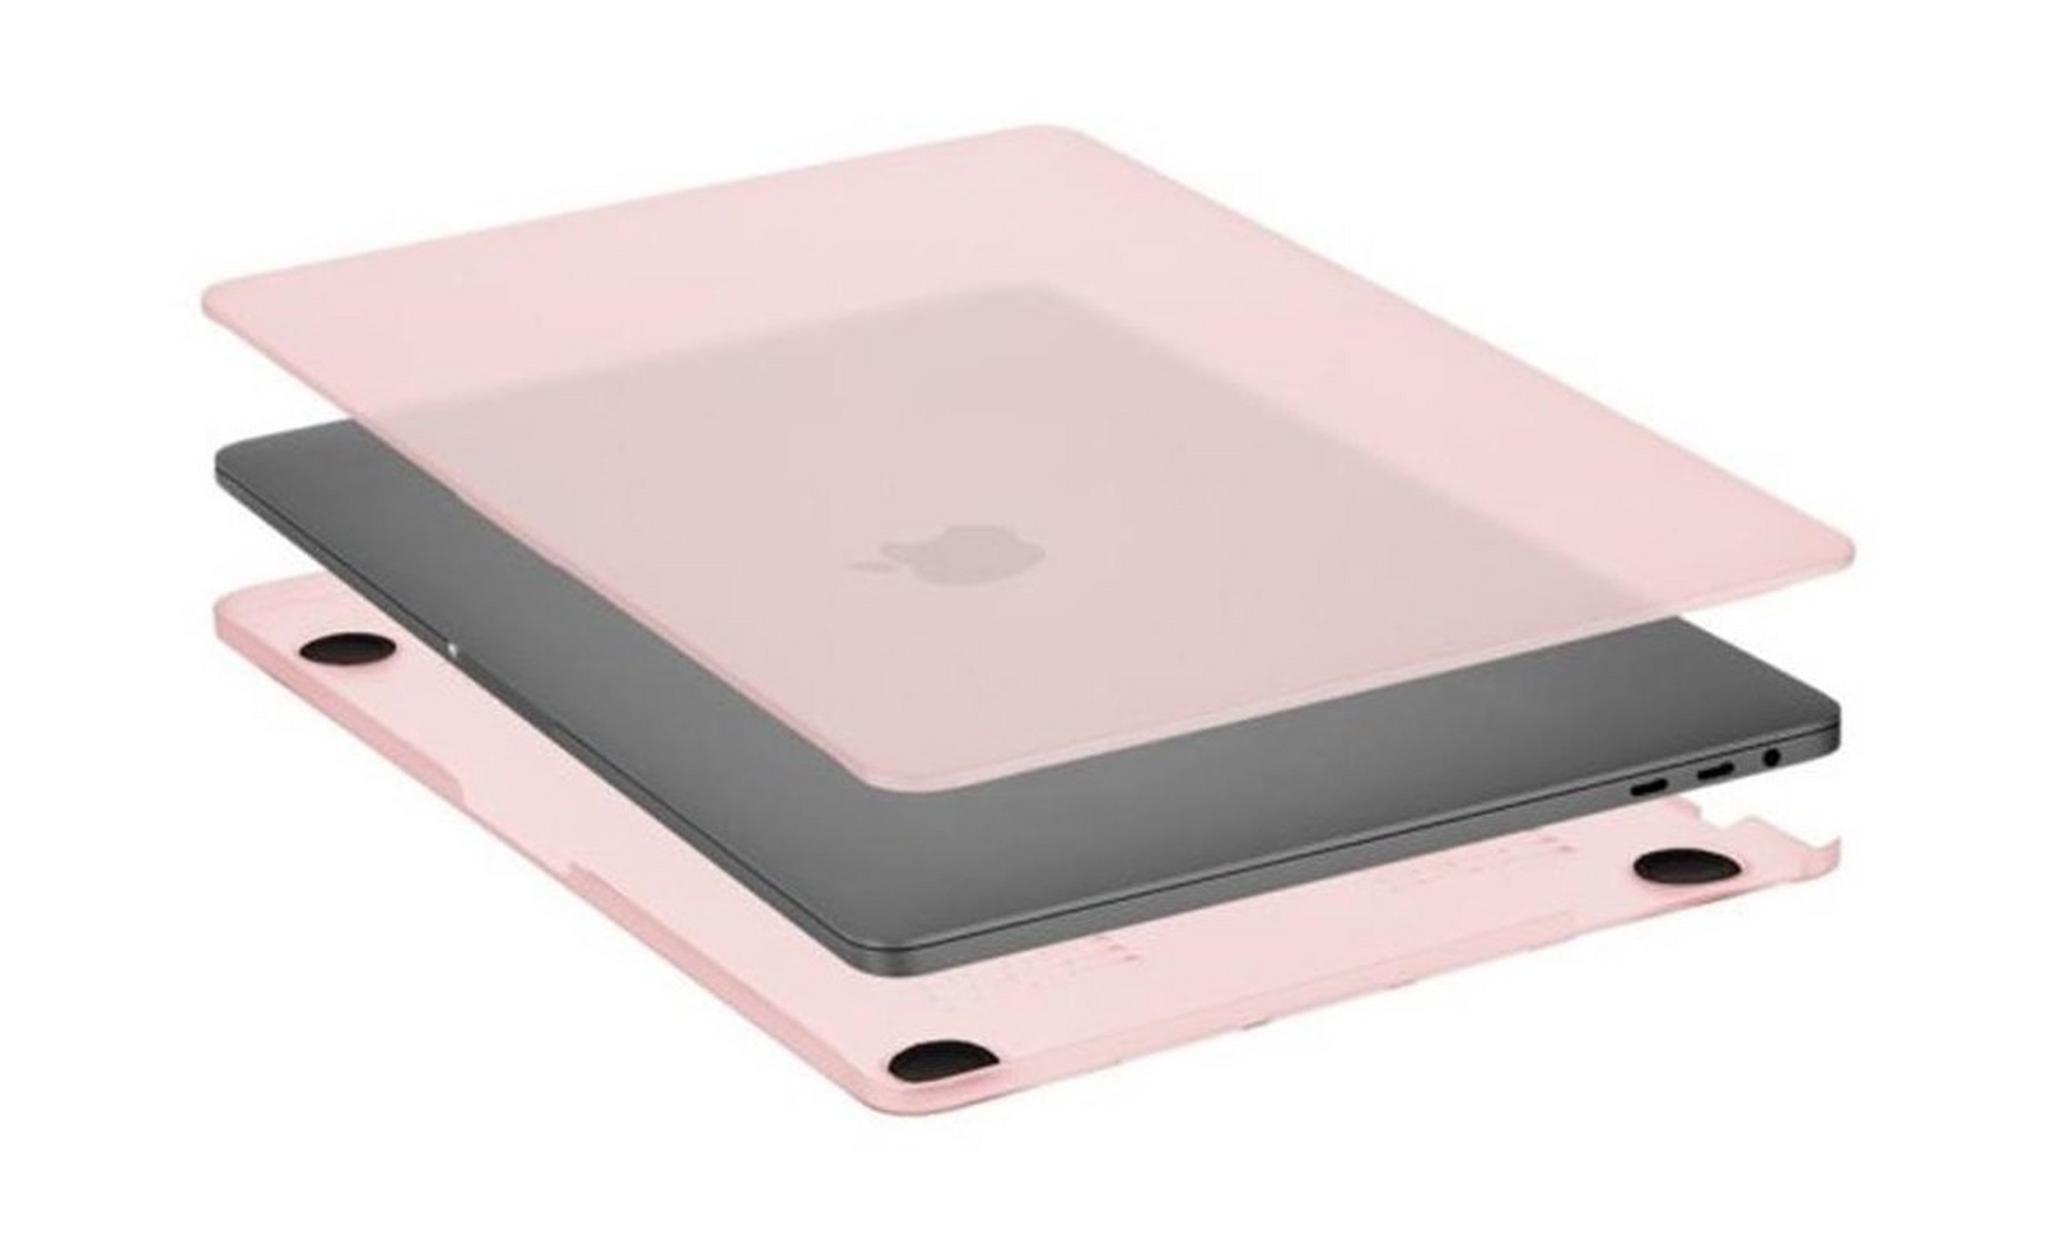 Casemate Snap Case For Macbook Pro 13-inch (2018) - Pink